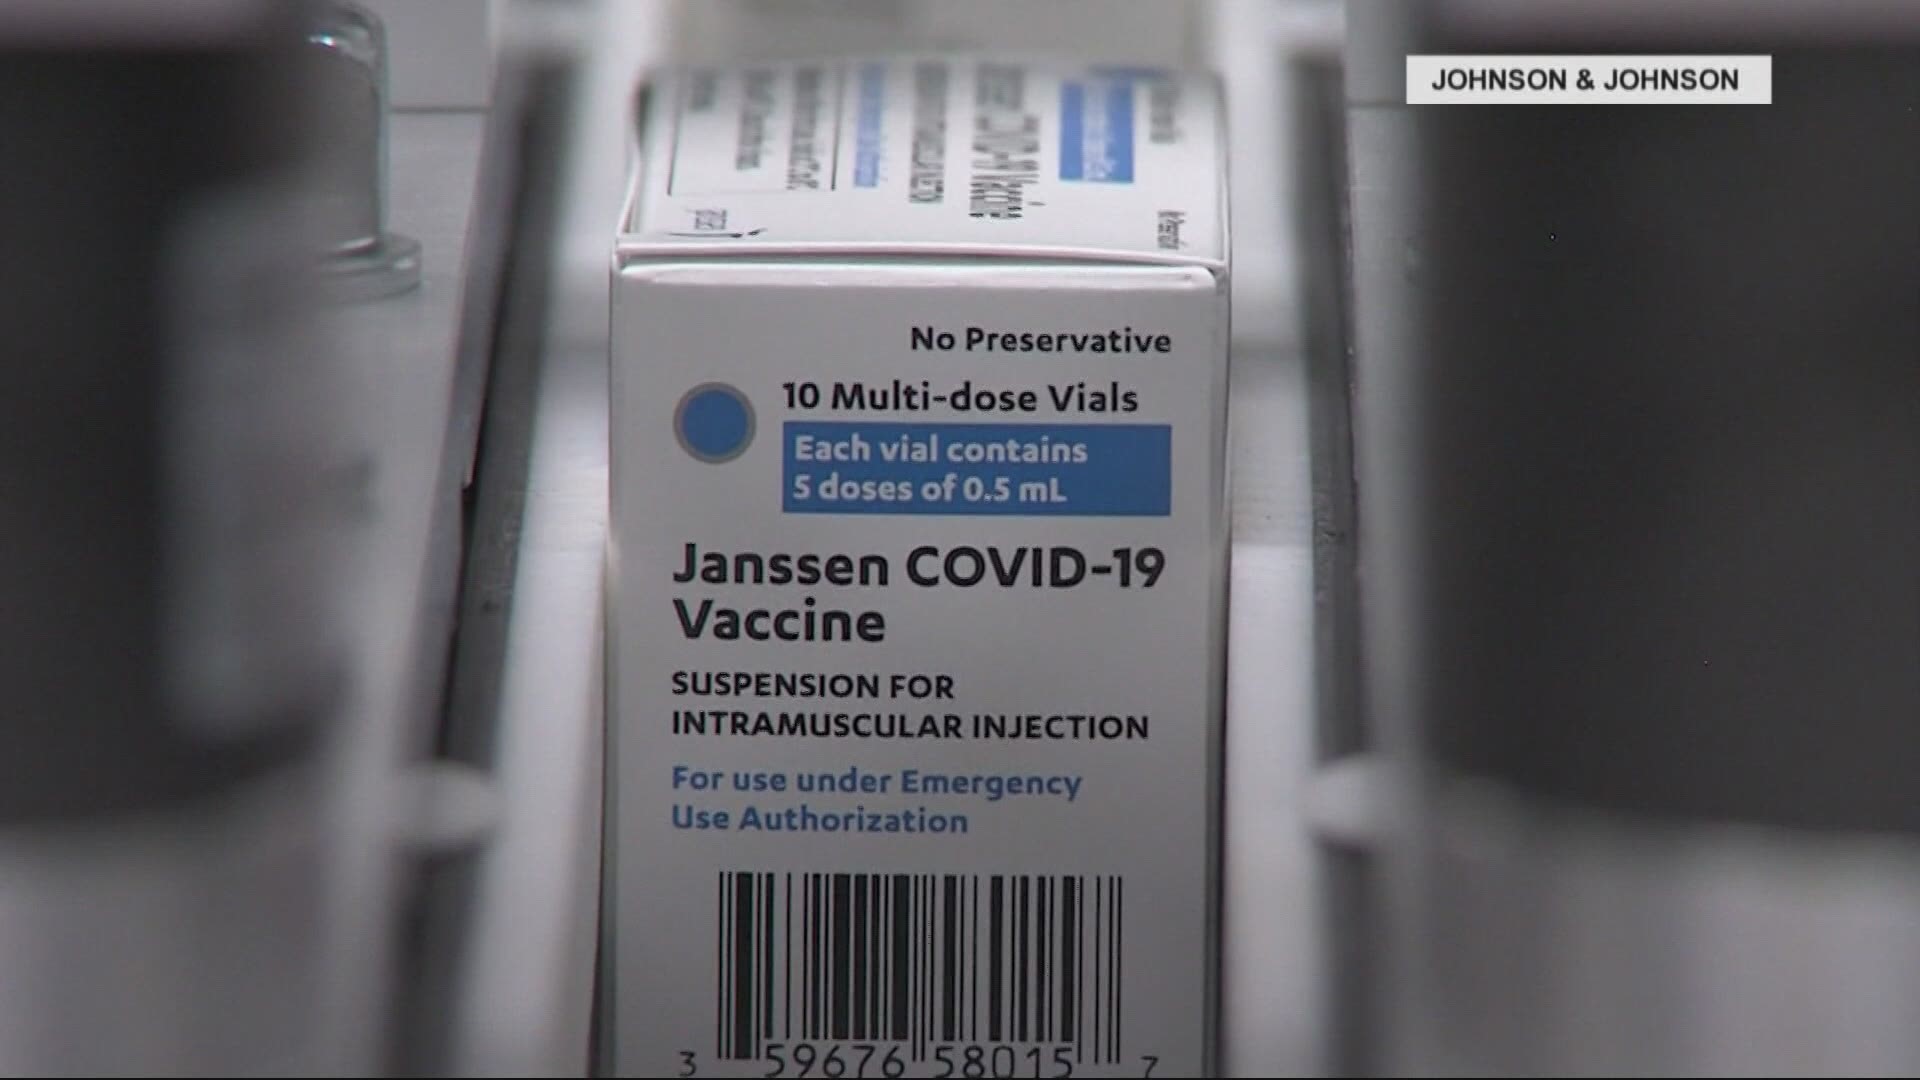 The woman died after developing a rare, serious blood clot within two weeks of getting the J&J vaccine, OHA said. The CDC is now investigating.